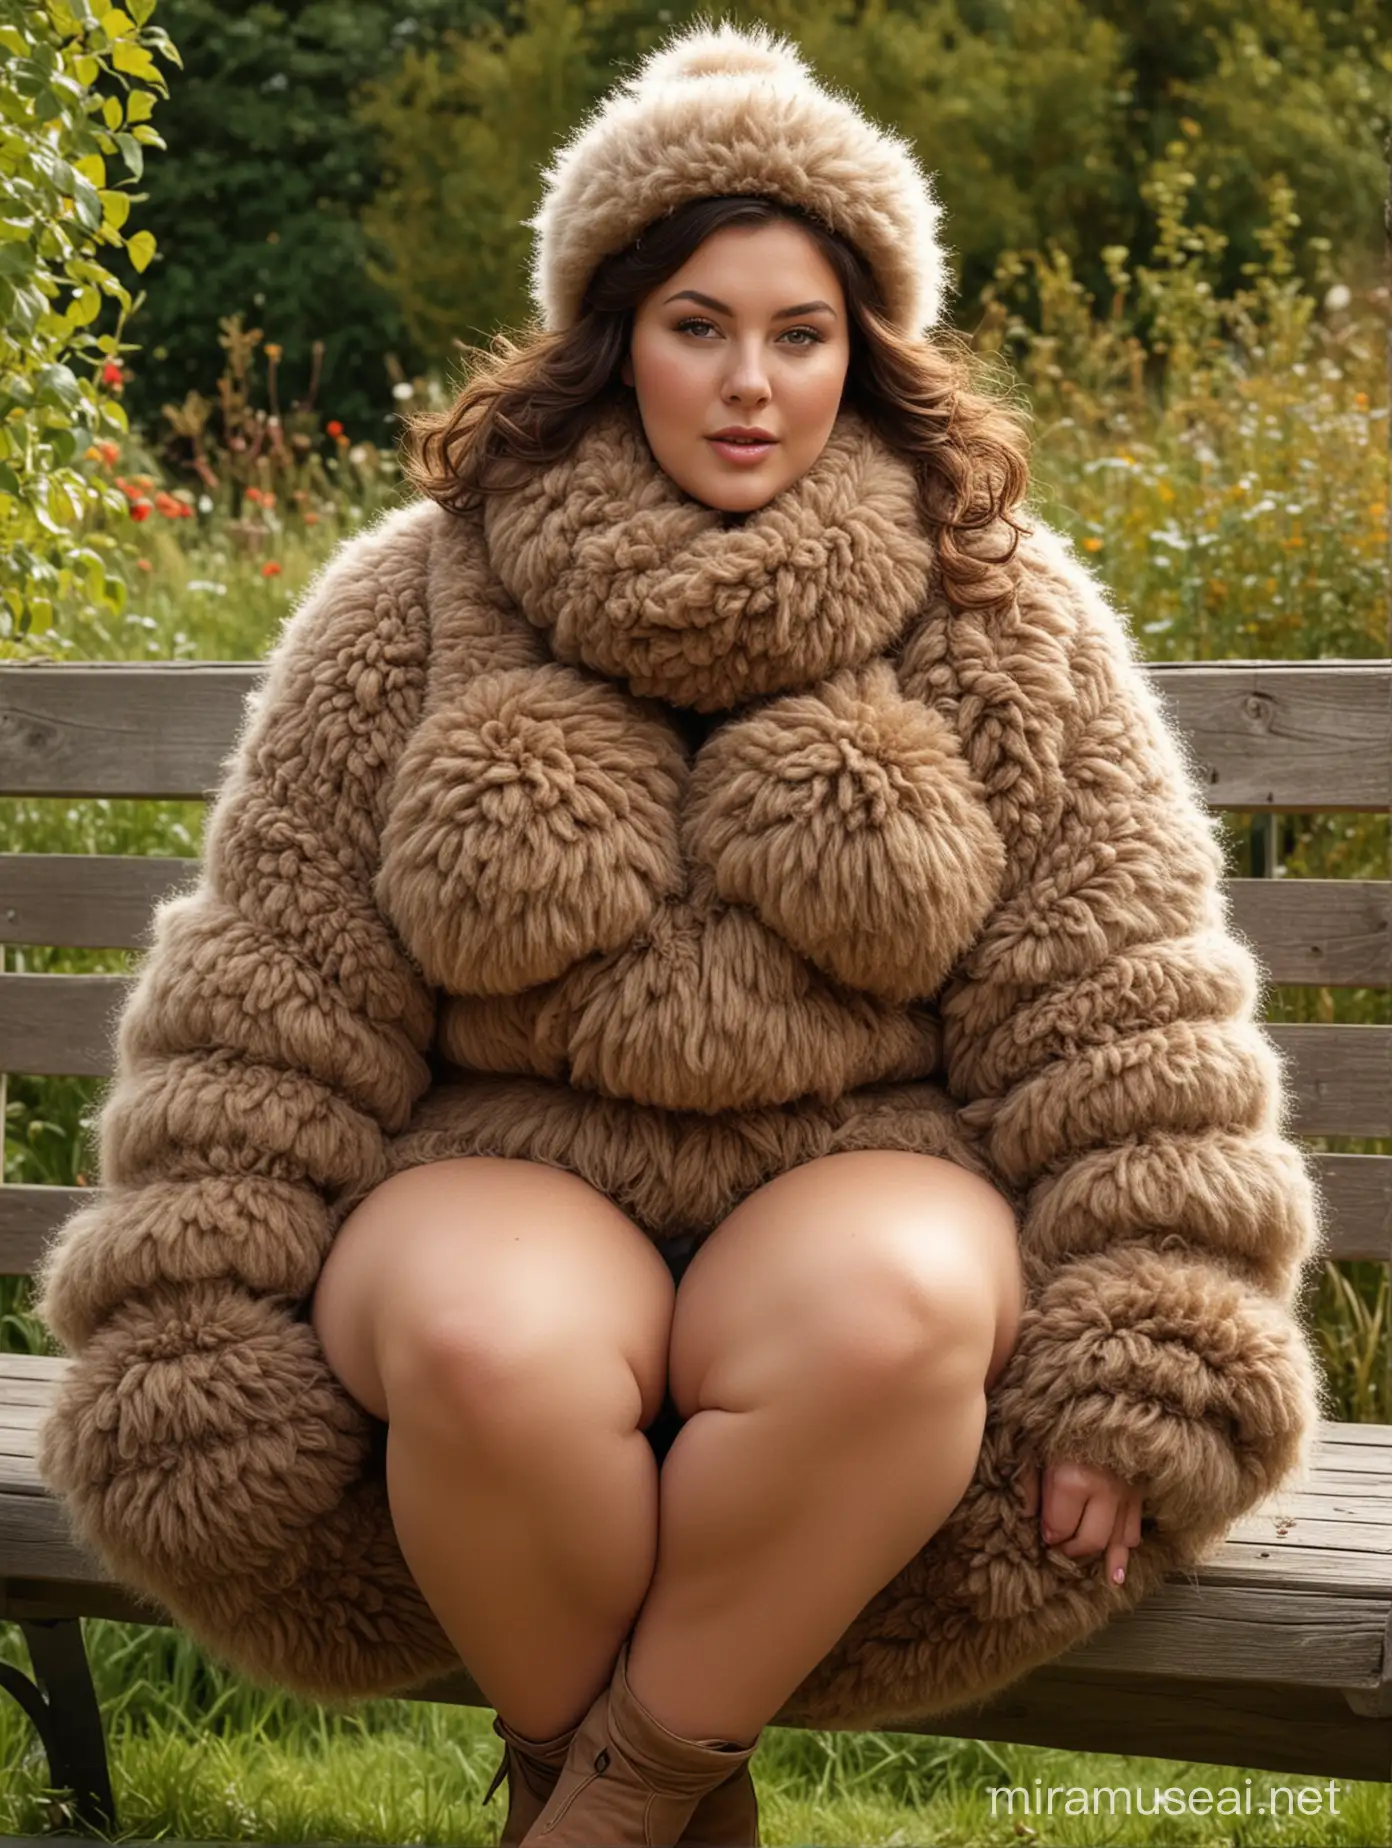 Curvy PlusSize Woman Relaxing on Garden Bench in Thick Fuzzy Wool Outfit